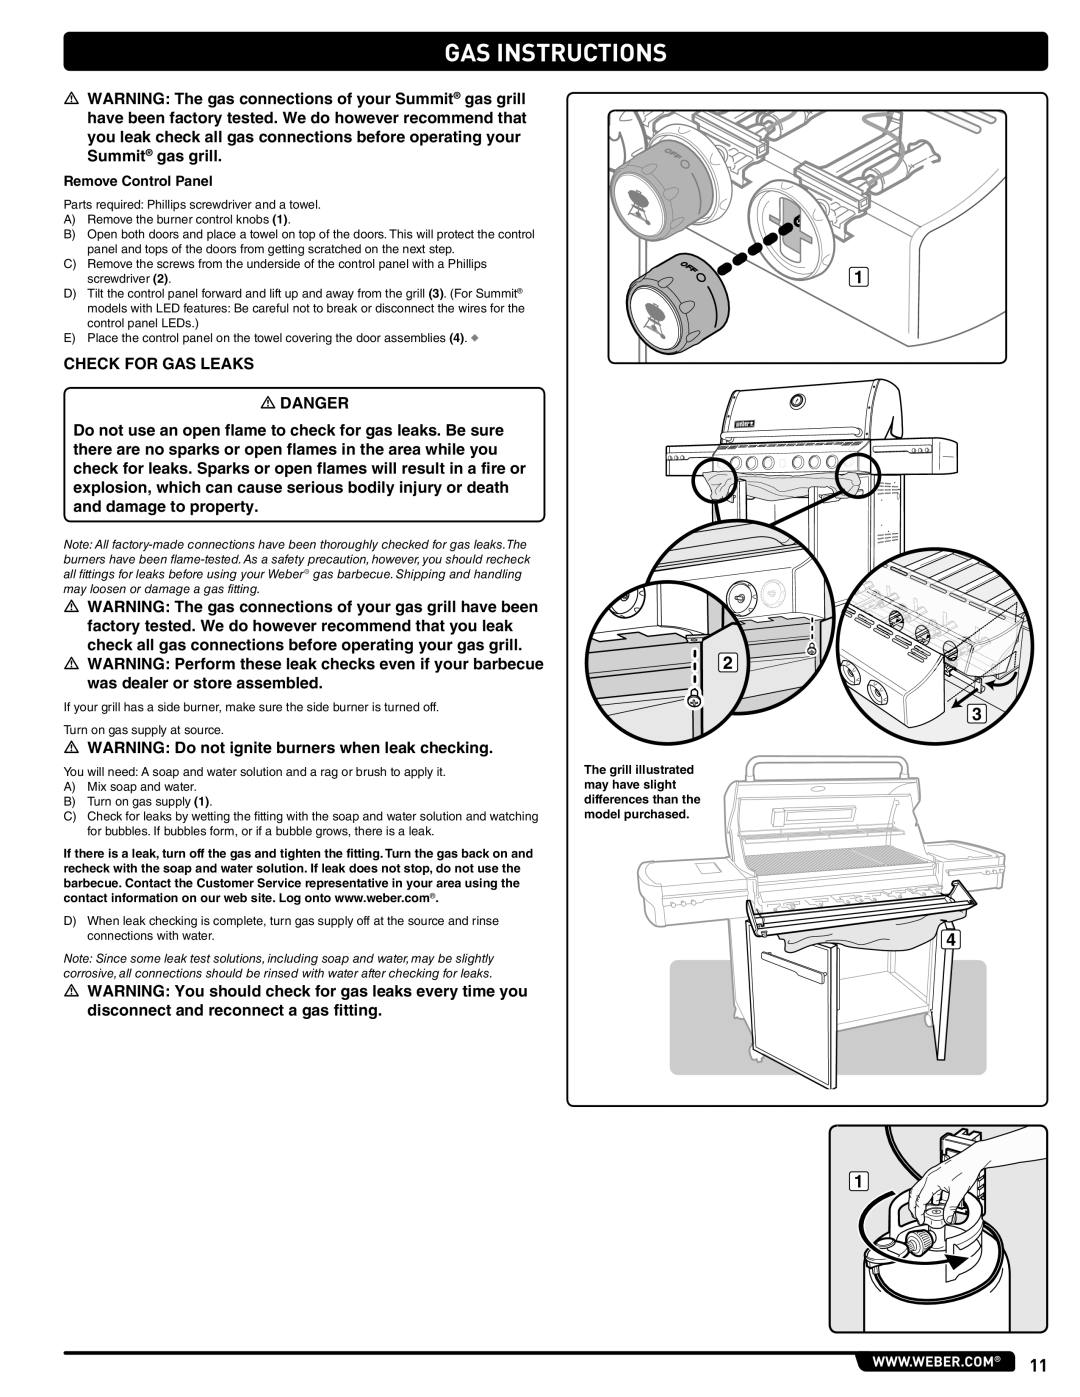 Summit 56214 manual Gas Instructions, CHECK FOR GAS LEAKS m DANGER 